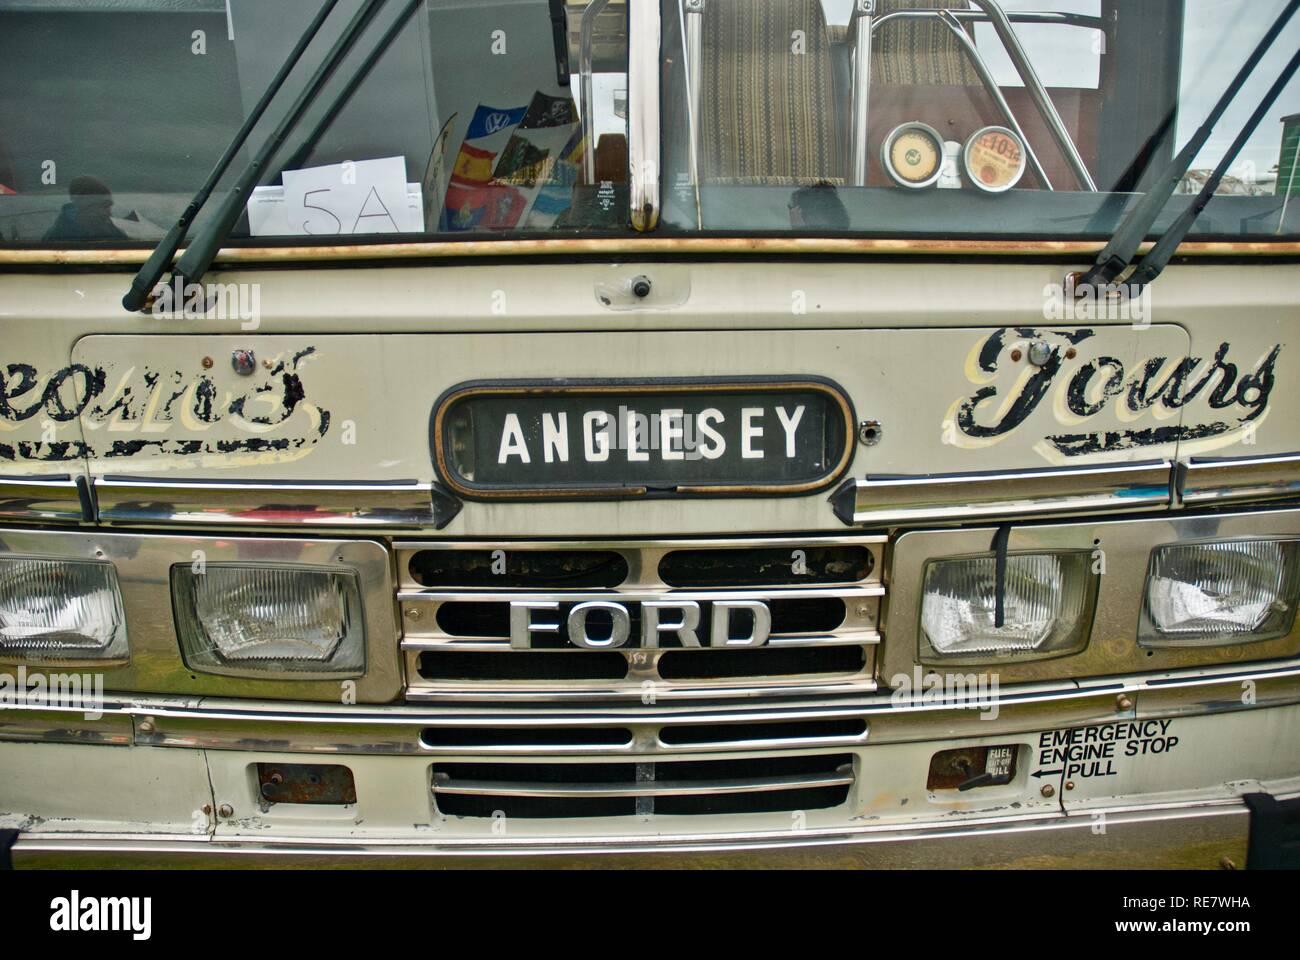 Ford Coach at the Anglesey Vintage Rally, Anglesey, North Wales, UK, May 2015 Stock Photo